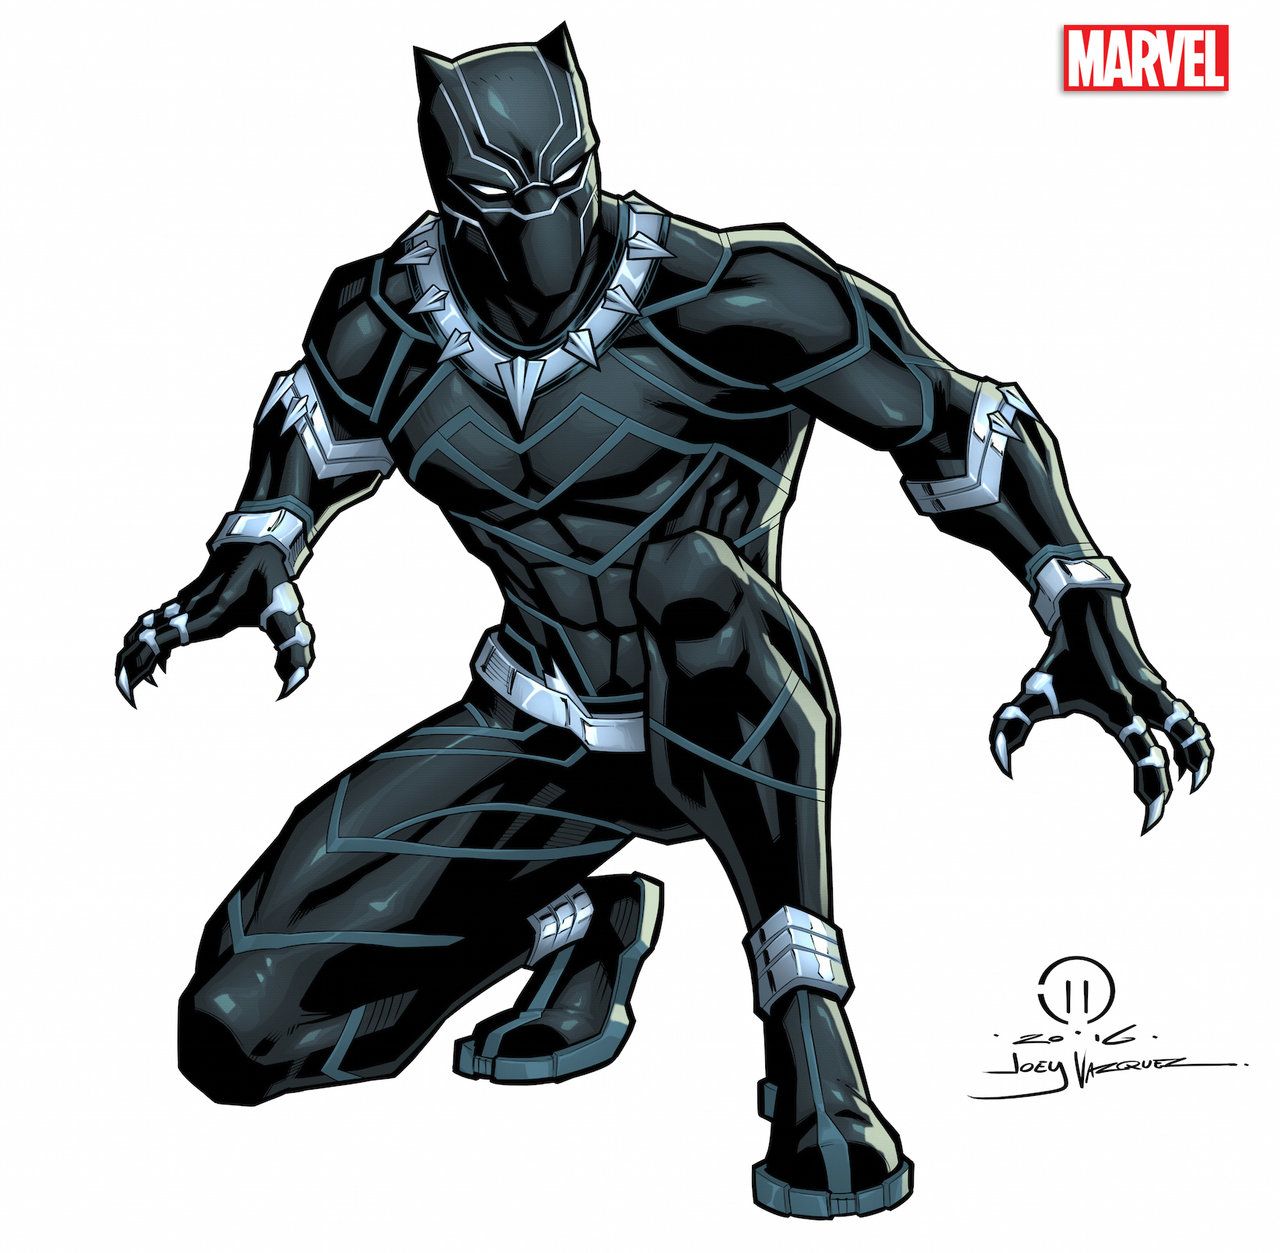 Marvel 25 Superpowers Black Panther Has That Are Kept Secret